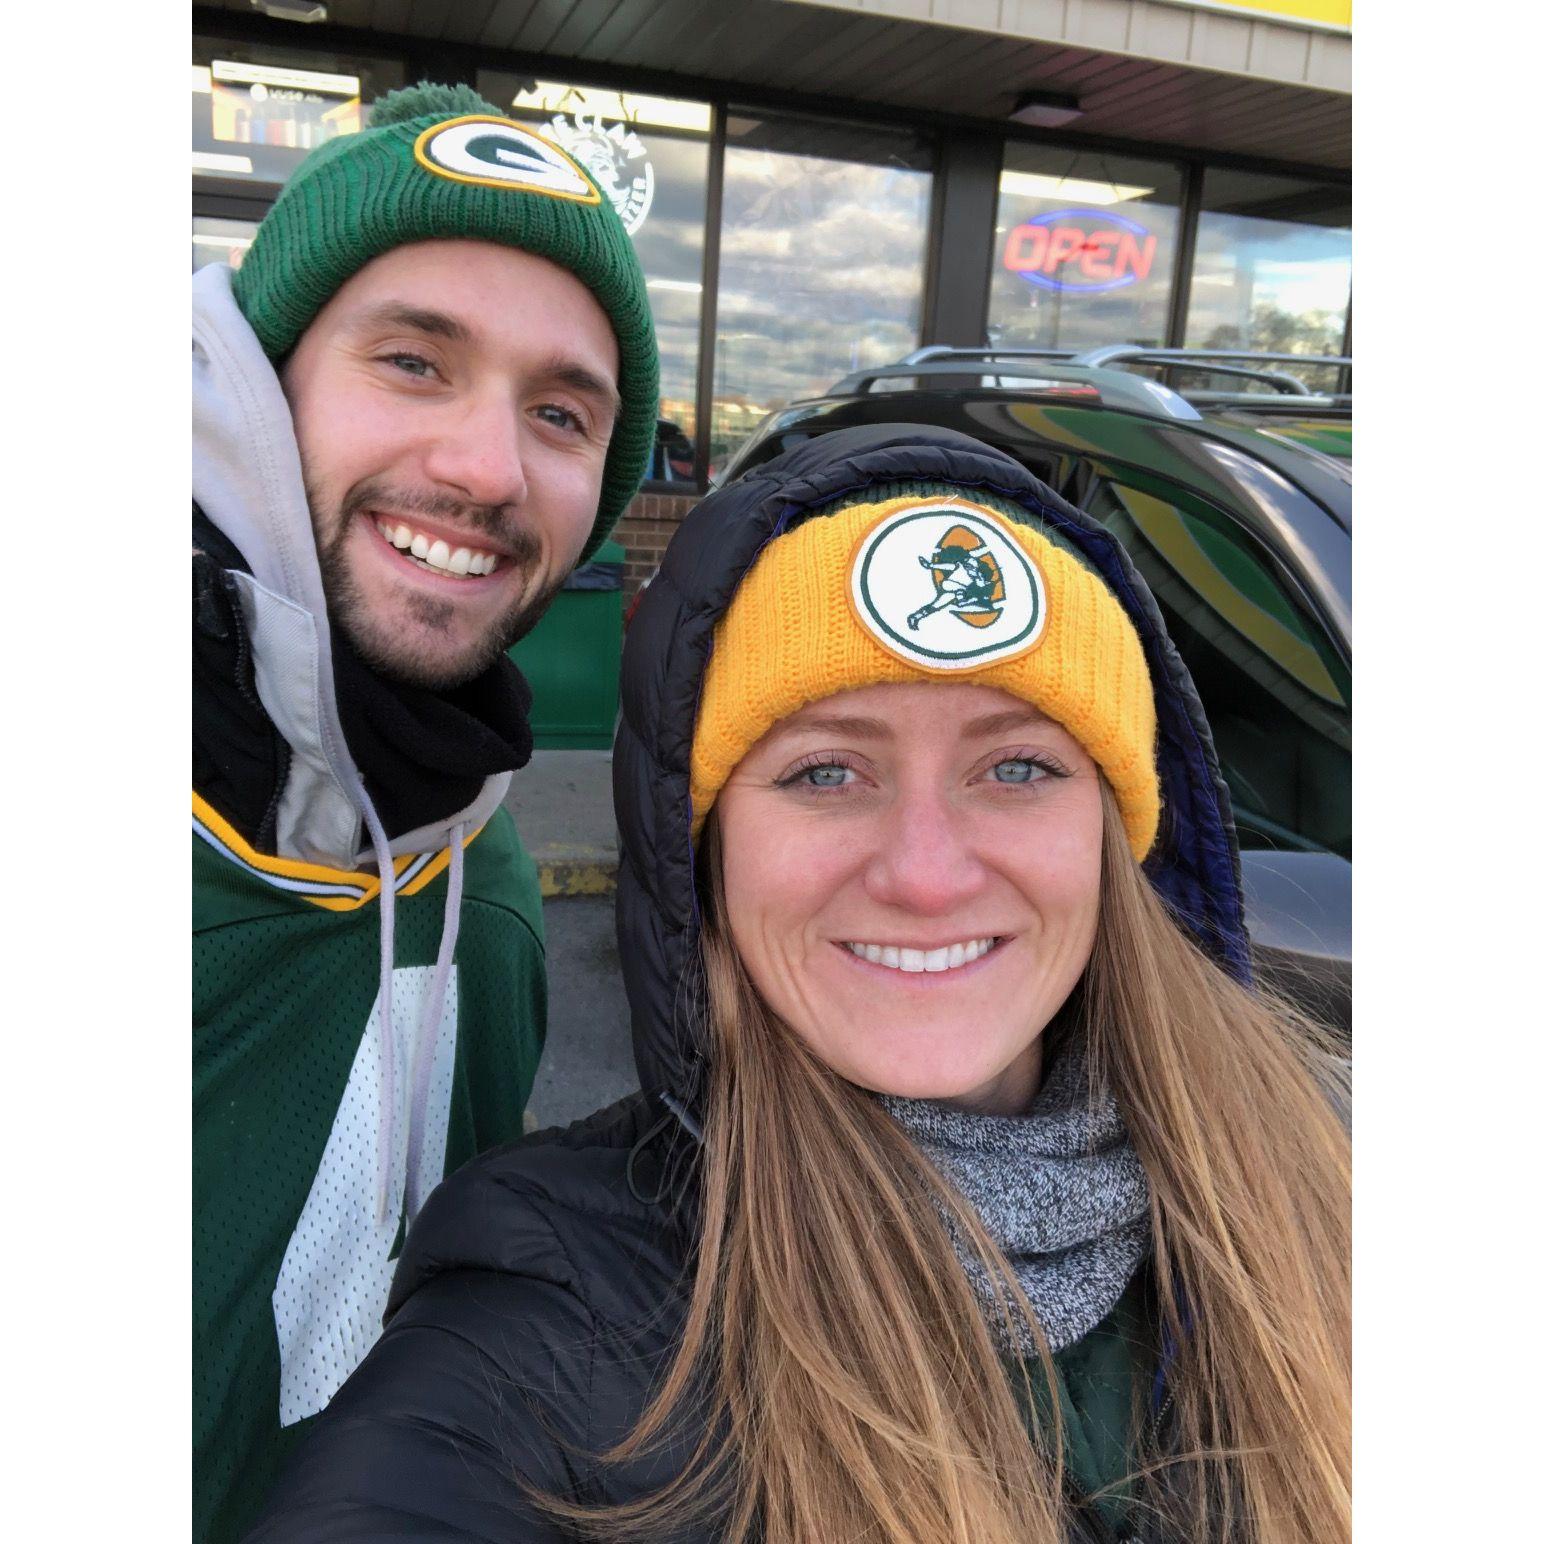 Packers Game at Lambeau Field, a Wisconsin rite of passage